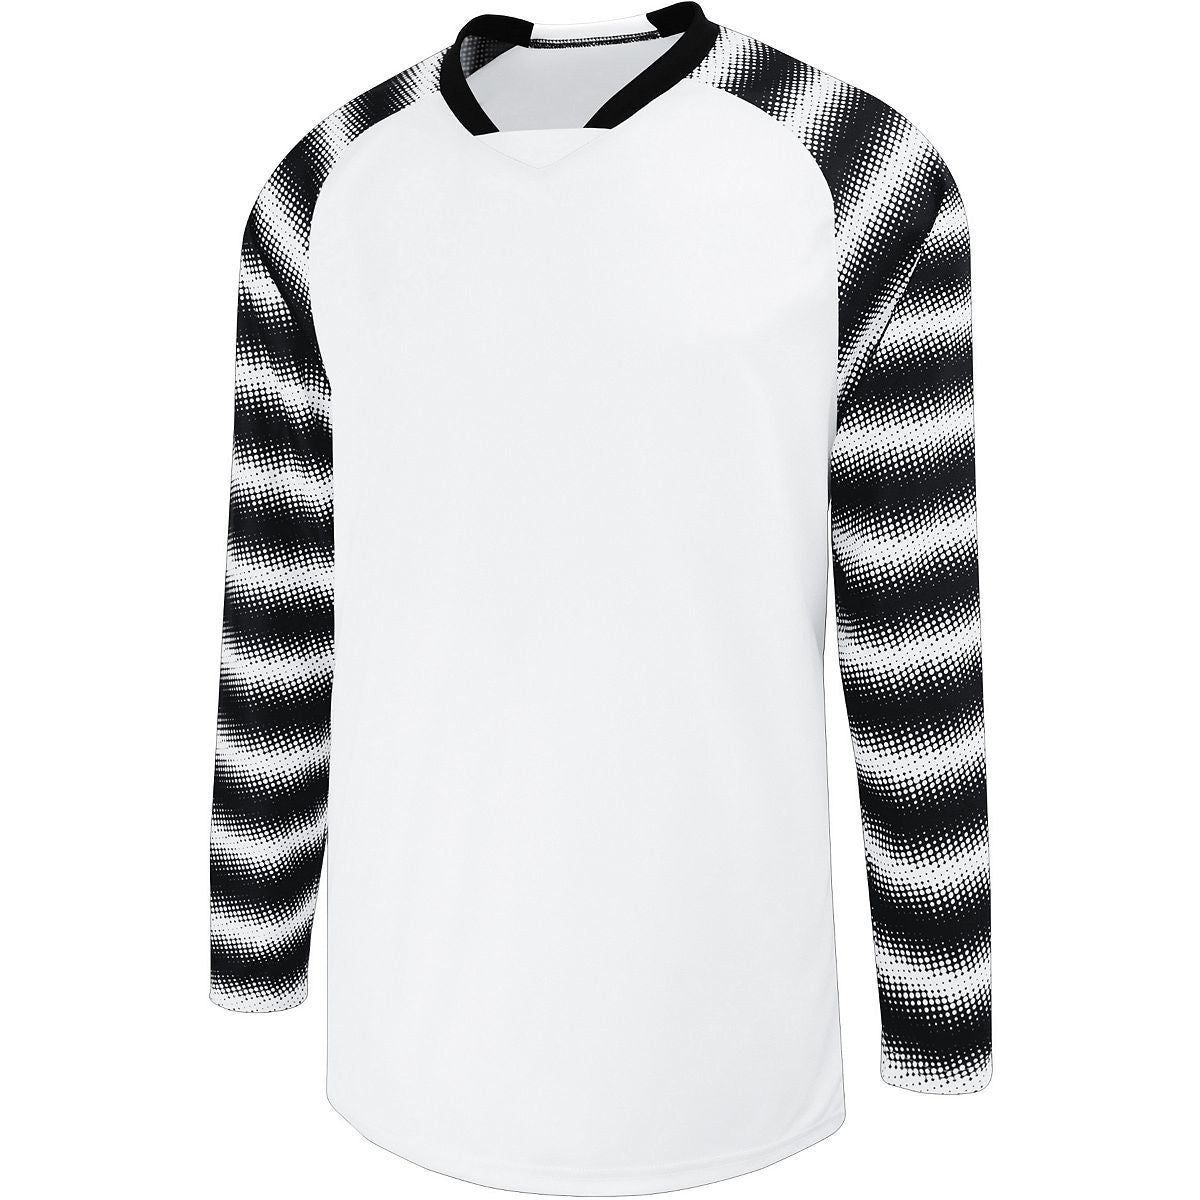 High 5 Youth Prism Goalkeeper Jersey in White/Black  -Part of the Youth, Youth-Jersey, High5-Products, Soccer, Shirts, All-Sports-1 product lines at KanaleyCreations.com